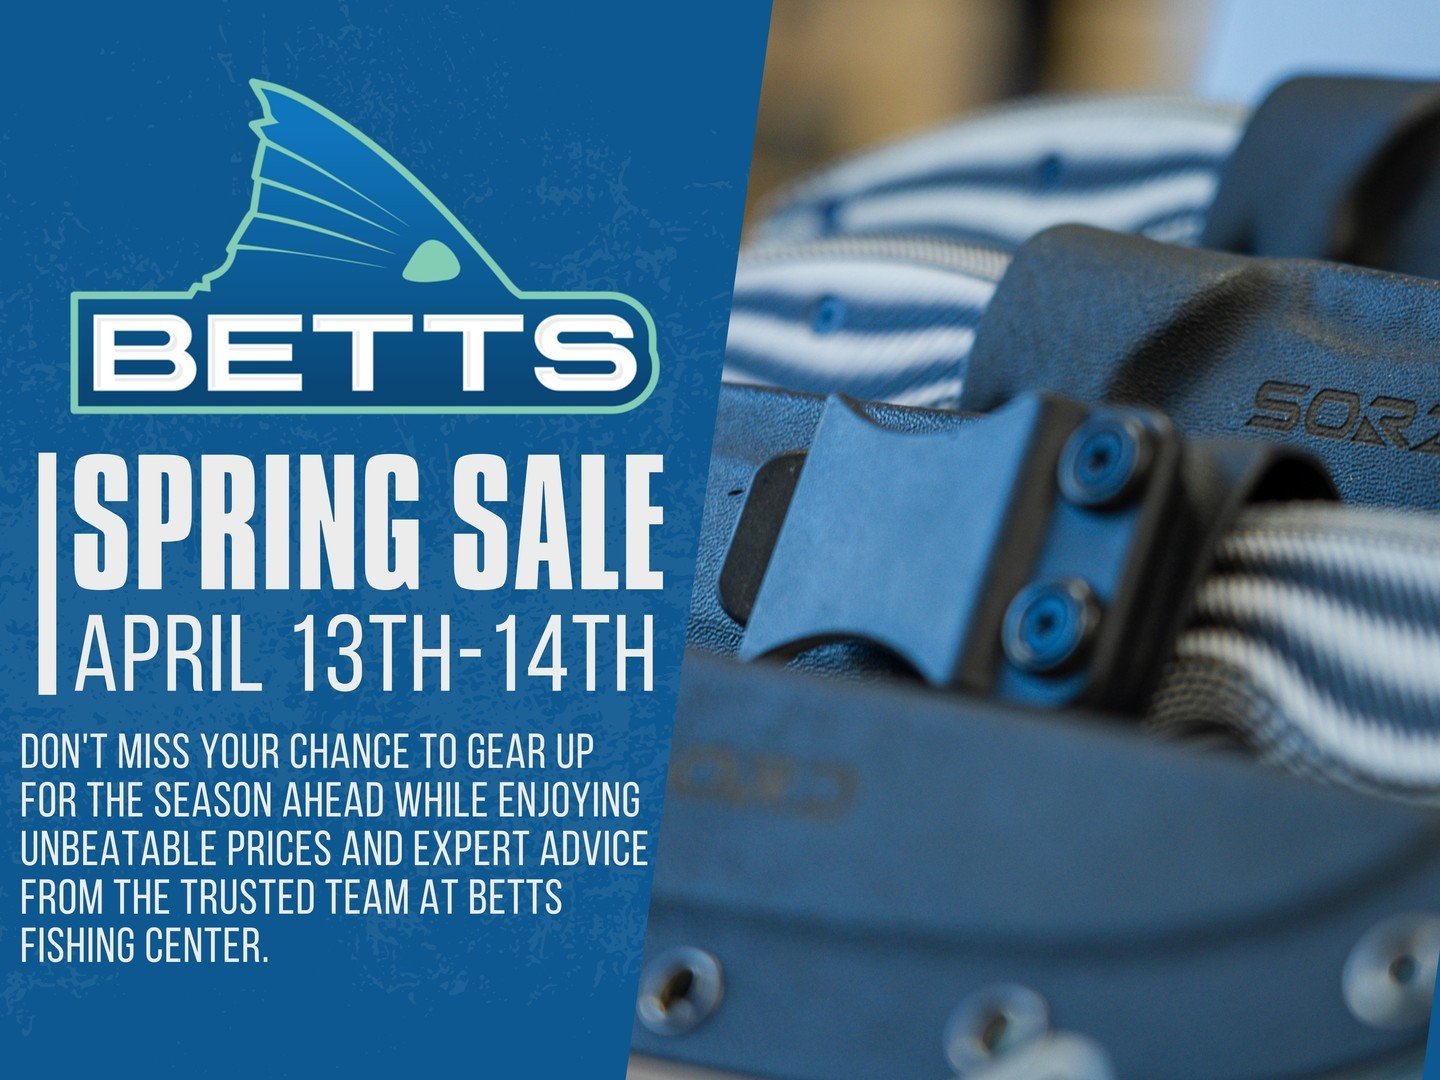 Gear up for the ultimate fishing season at Betts Fishing Center's massive Spring Sale this weekend, April 13th &amp; 14th! It's your chance to snag unbeatable deals on top-notch gear, making it the perfect time to stock up for your adventures. Don't 